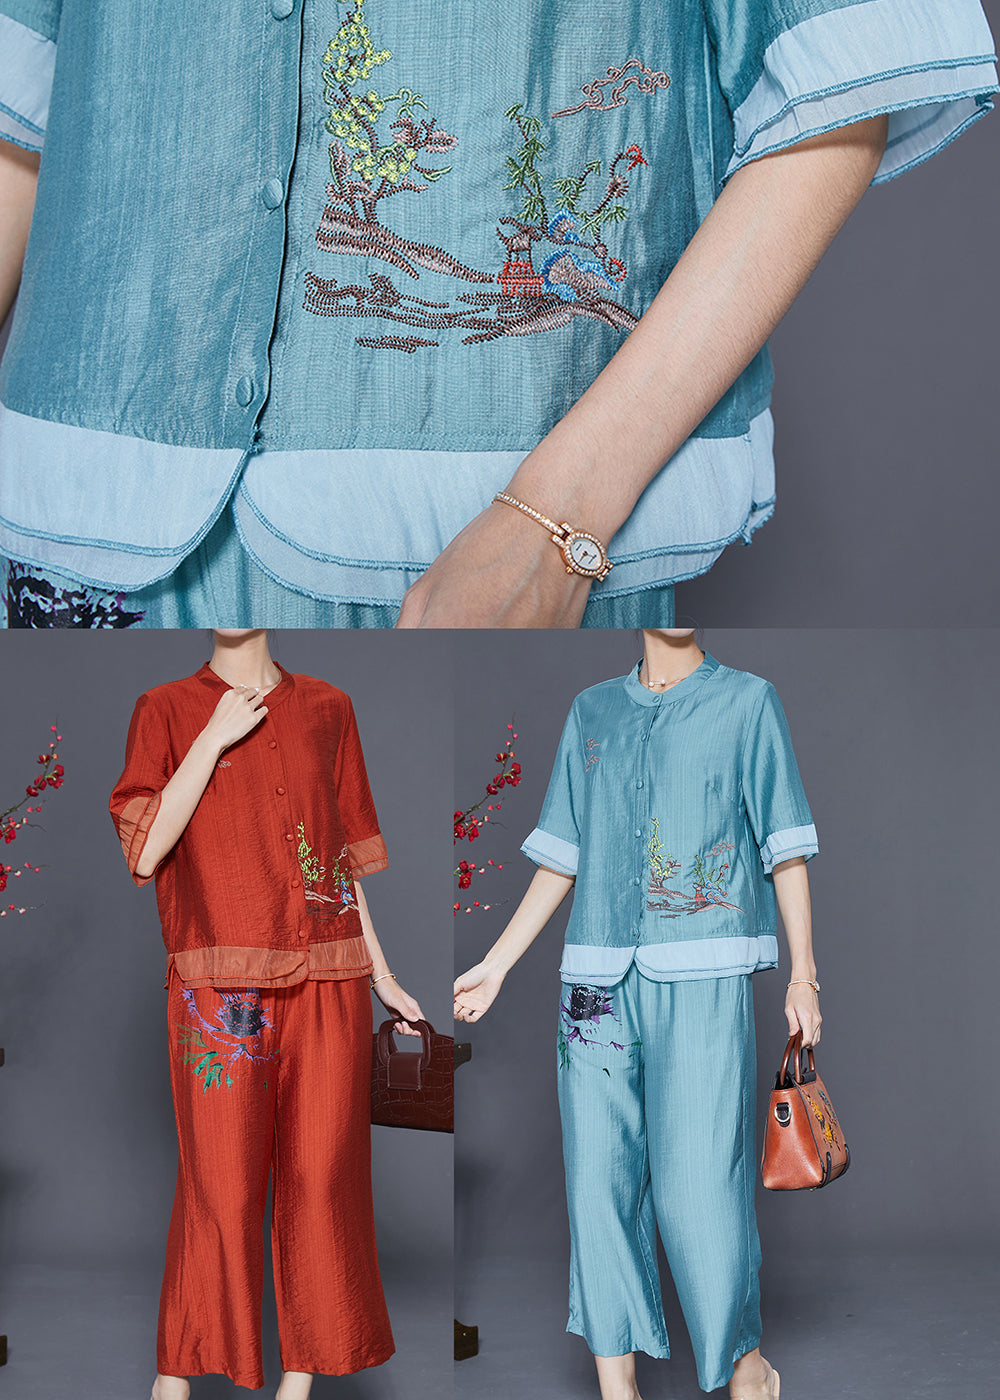 Lake Blue Patchwork Linen Silk Two Piece Set Women Clothing Embroideried Summer LY5593 - fabuloryshop